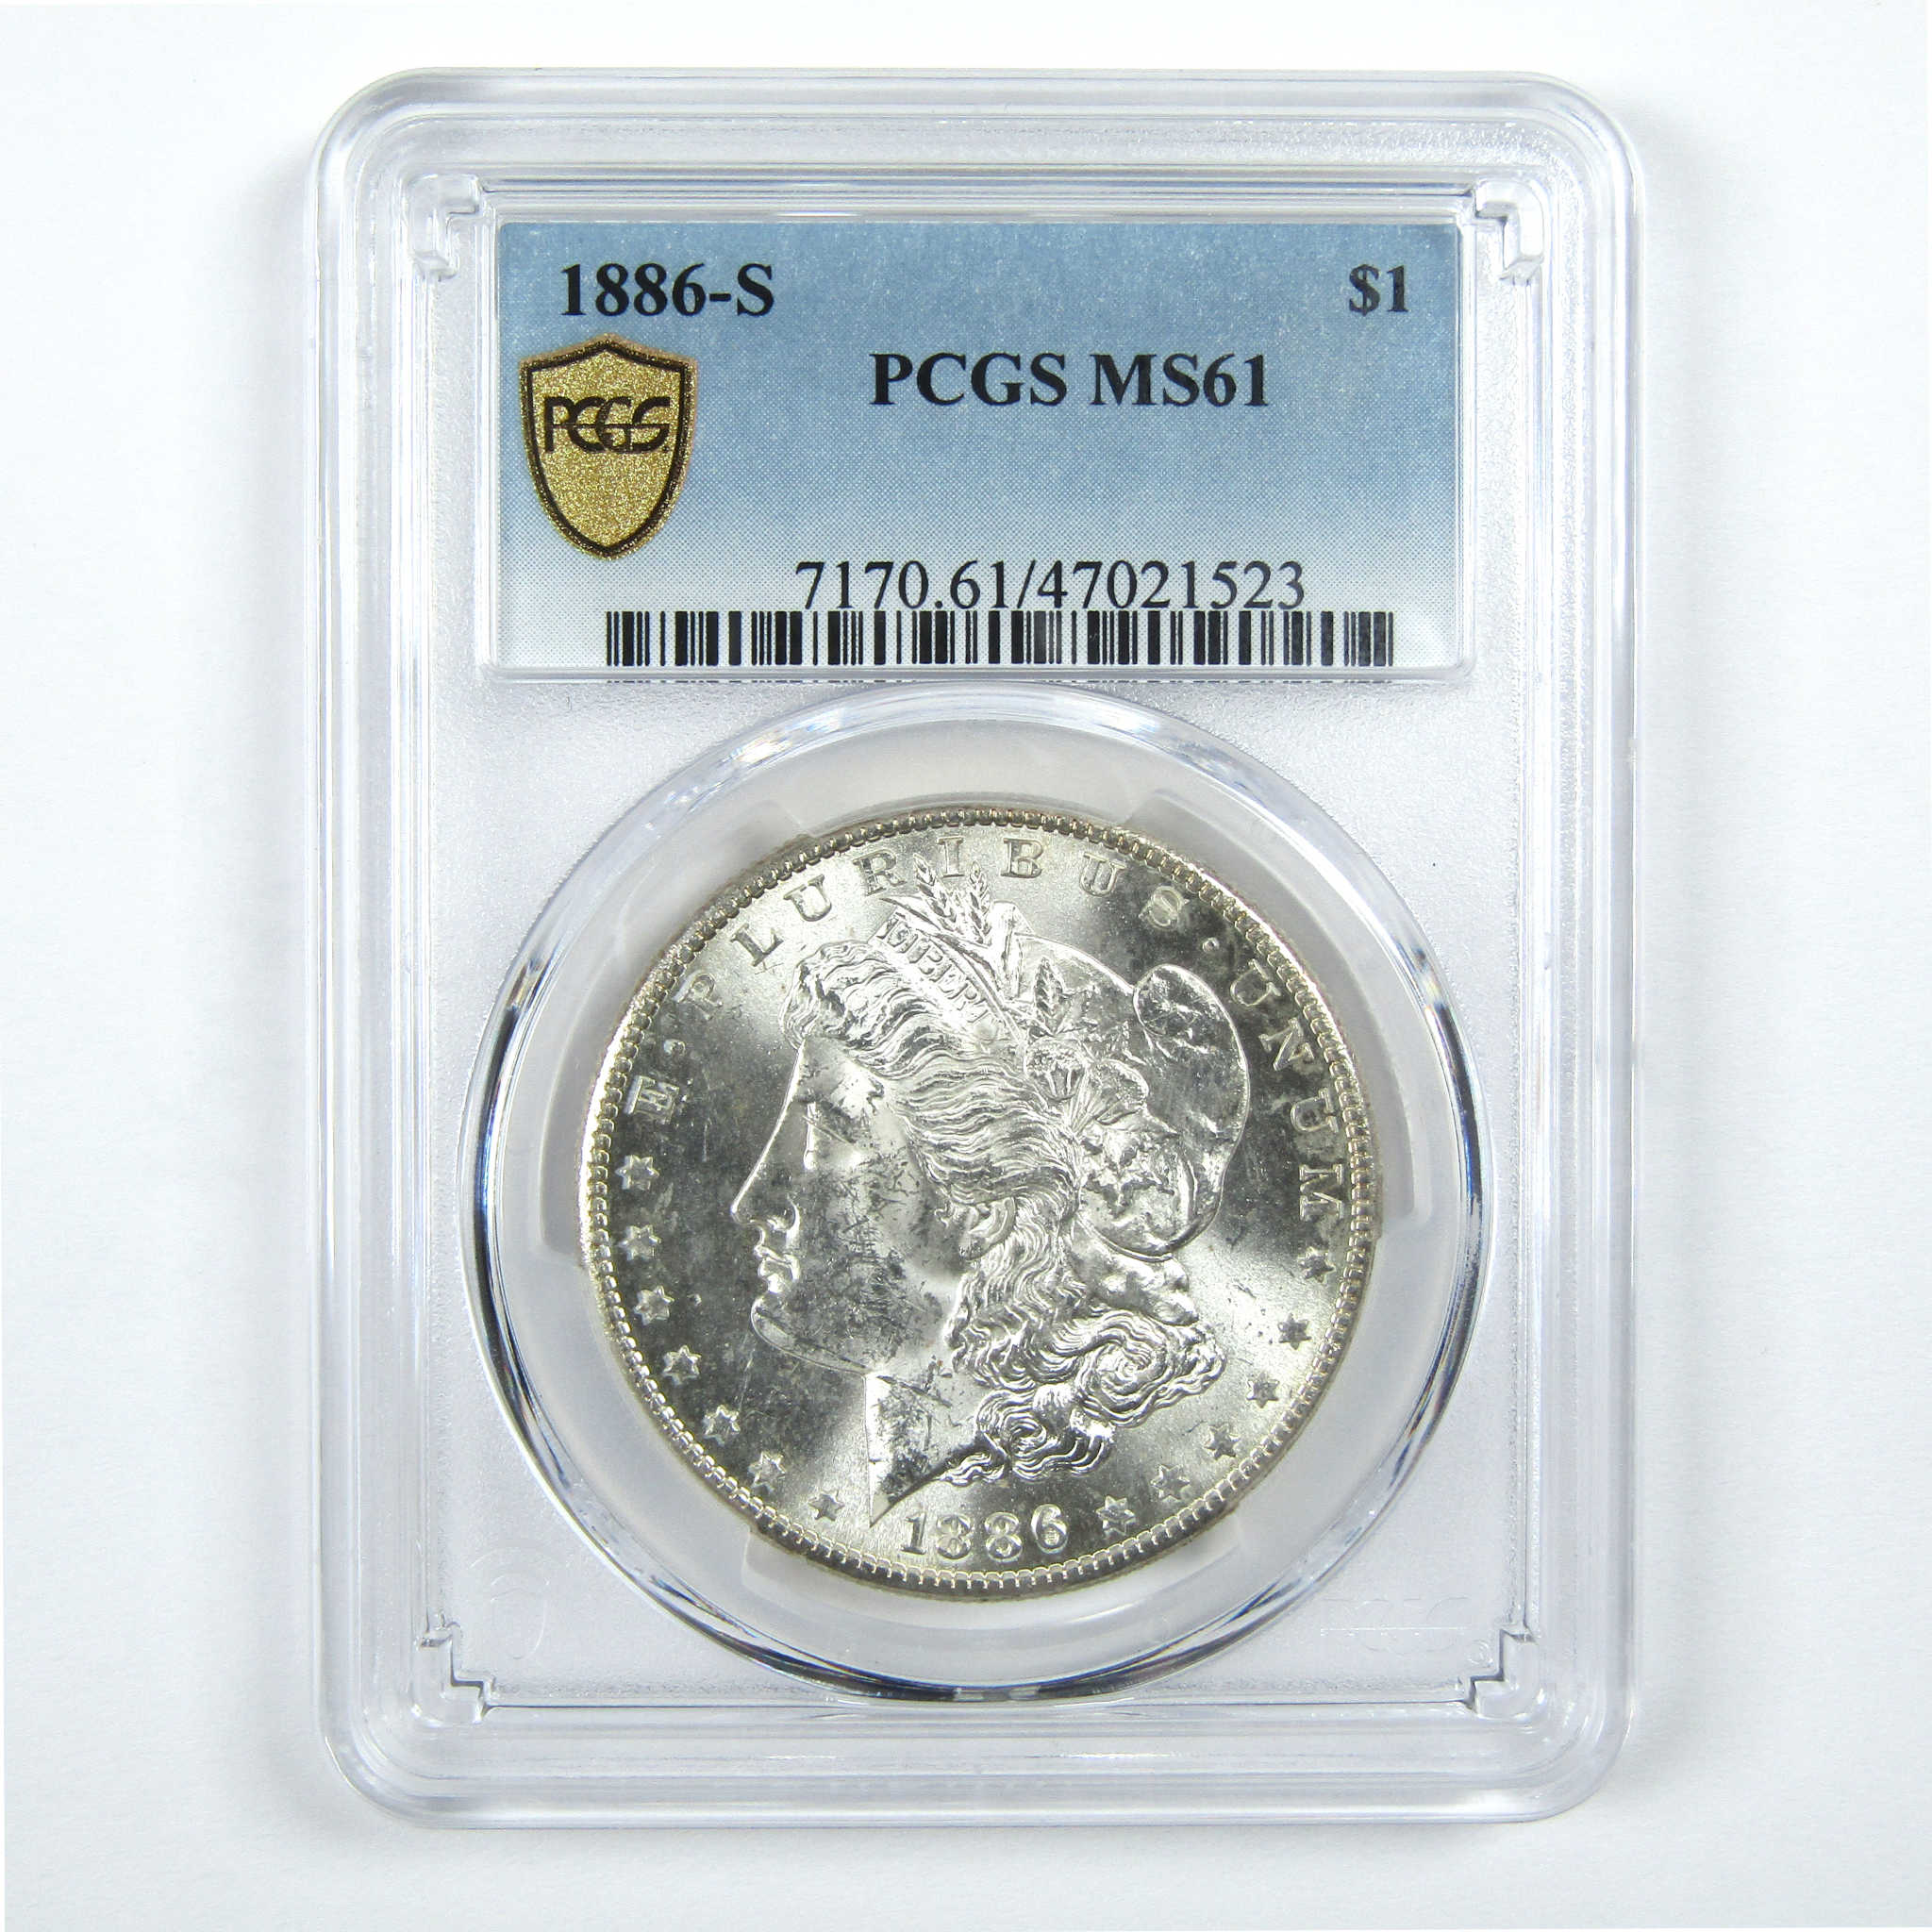 1886 S Morgan Dollar MS 61 PCGS Silver $1 Uncirculated Coin SKU:I13387 - Morgan coin - Morgan silver dollar - Morgan silver dollar for sale - Profile Coins &amp; Collectibles